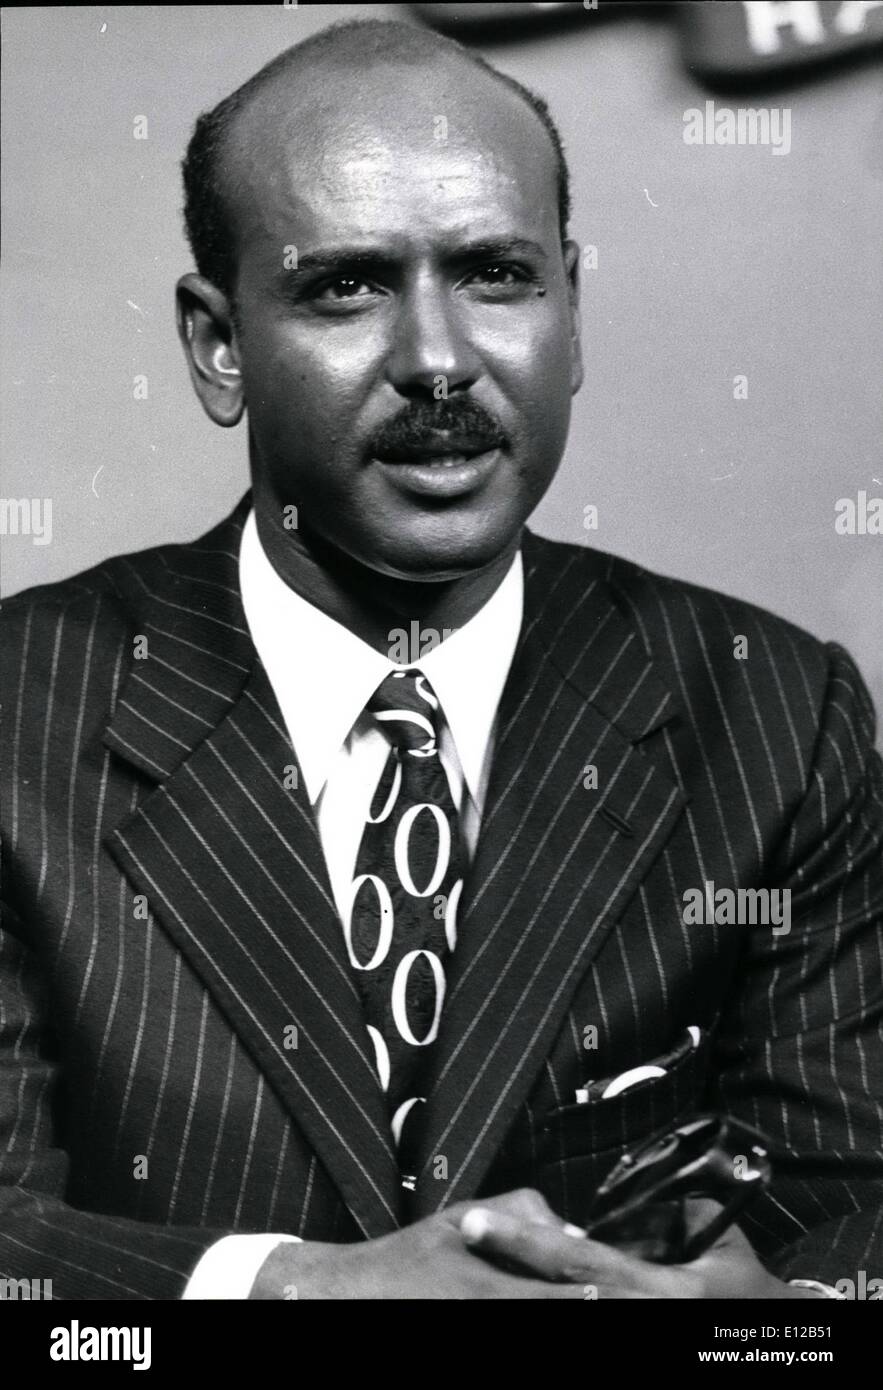 Dec. 09, 2011 - Colonel Ismael Ali Abokar ,vice president of Somali Democratic Republic. Born Erigabo, 1938. Educated Sheikh School and Sandhurst. Commissioned, 1961. Member of Supreme Revolutionary Council, 1969. Secretary of State for Information and National Guidance, 1970. Vice President, 1971. Married, five children. Stock Photo